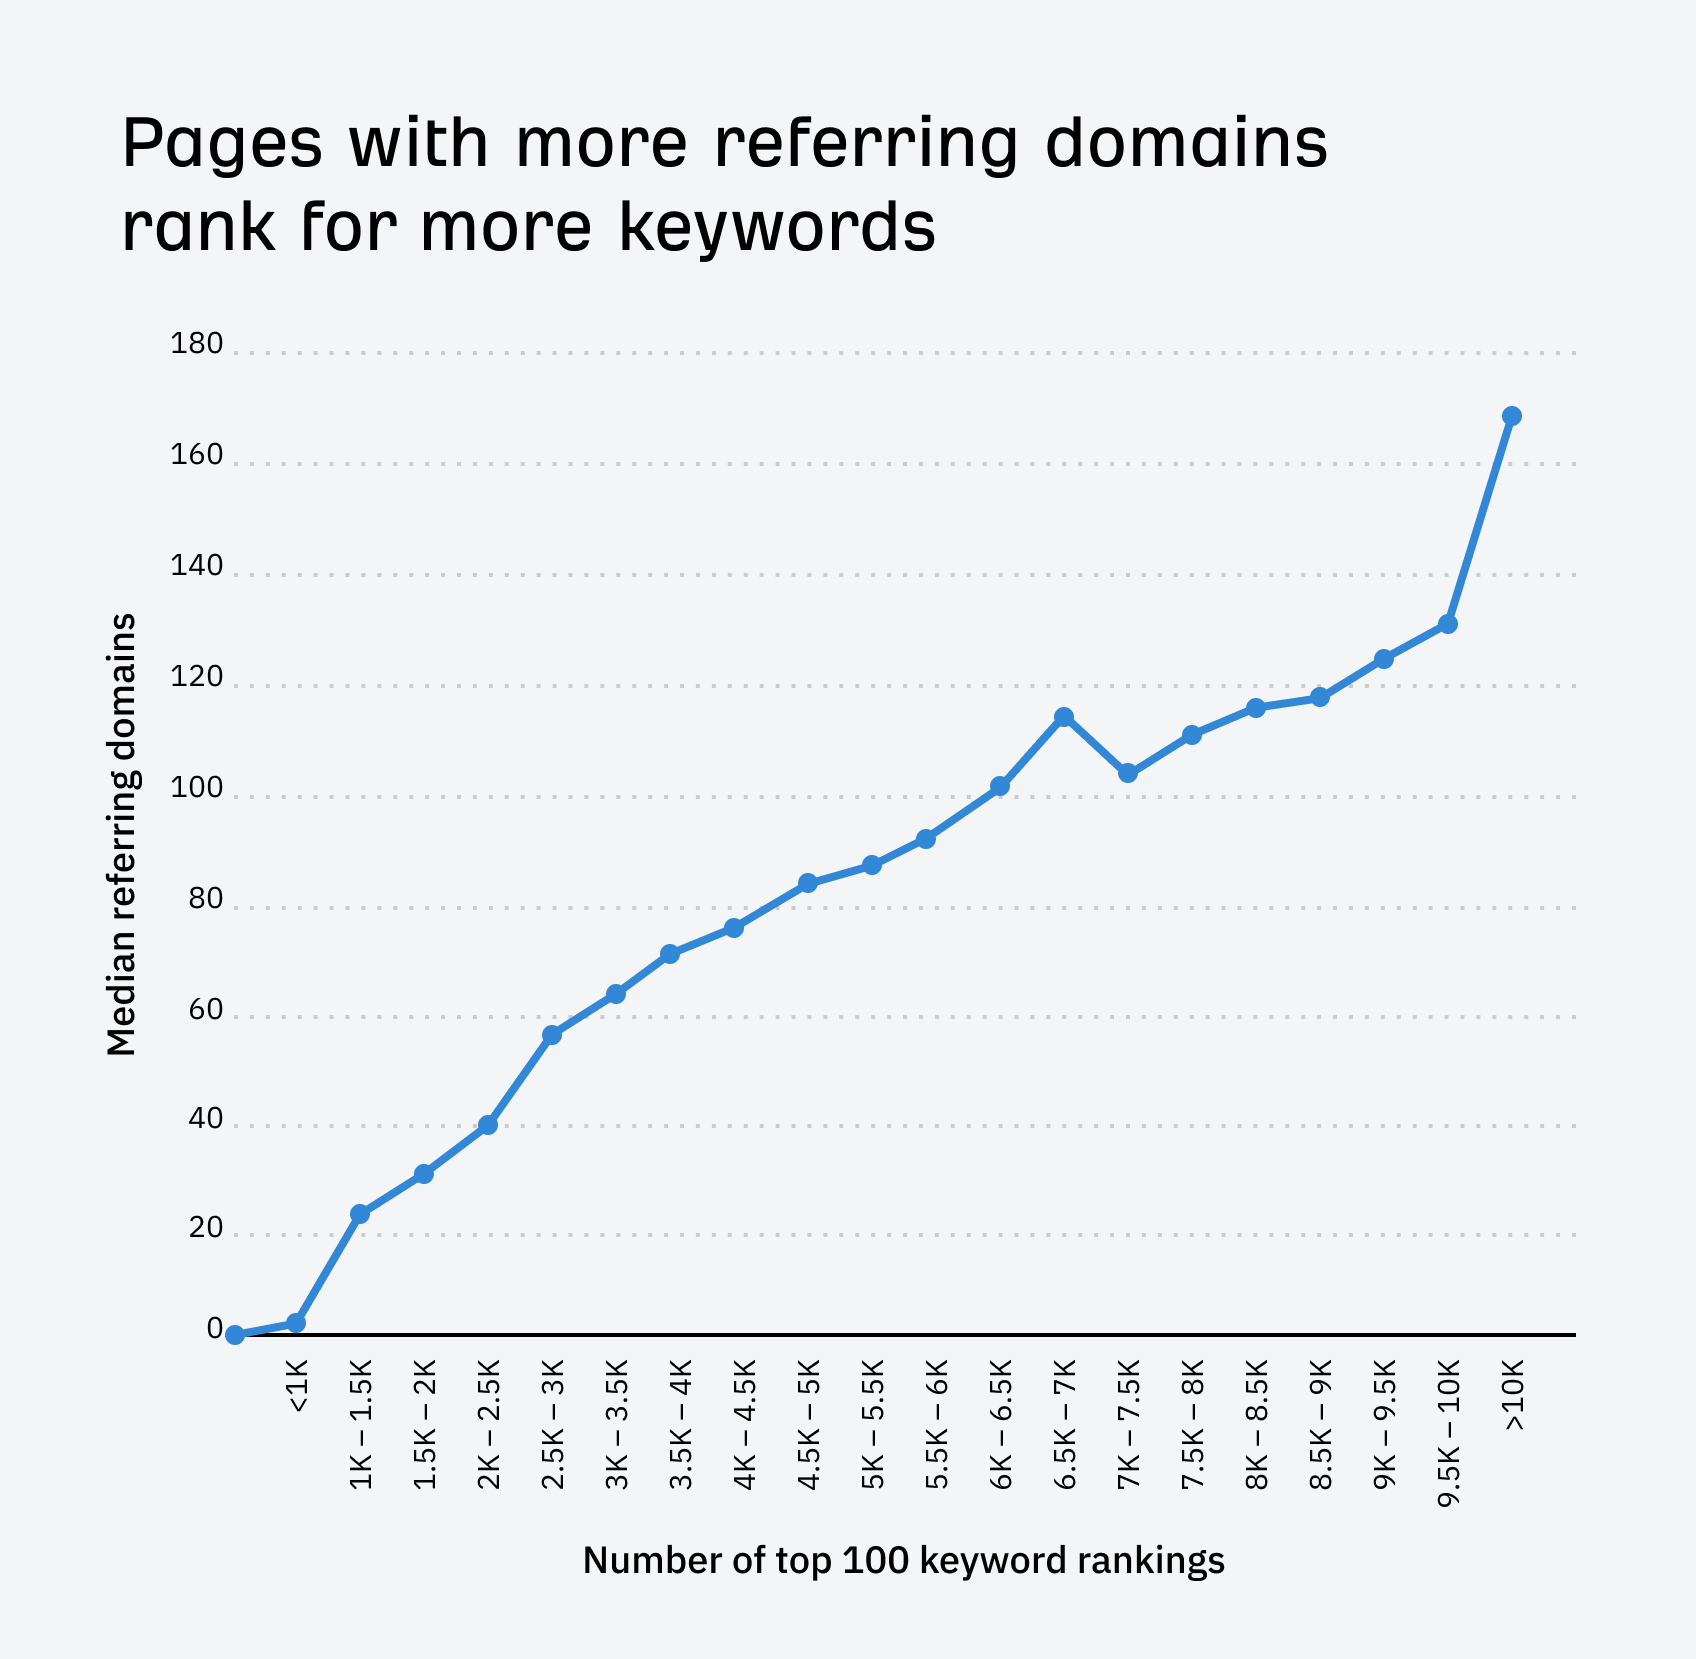 Pages with more referring domains rank for more keywords